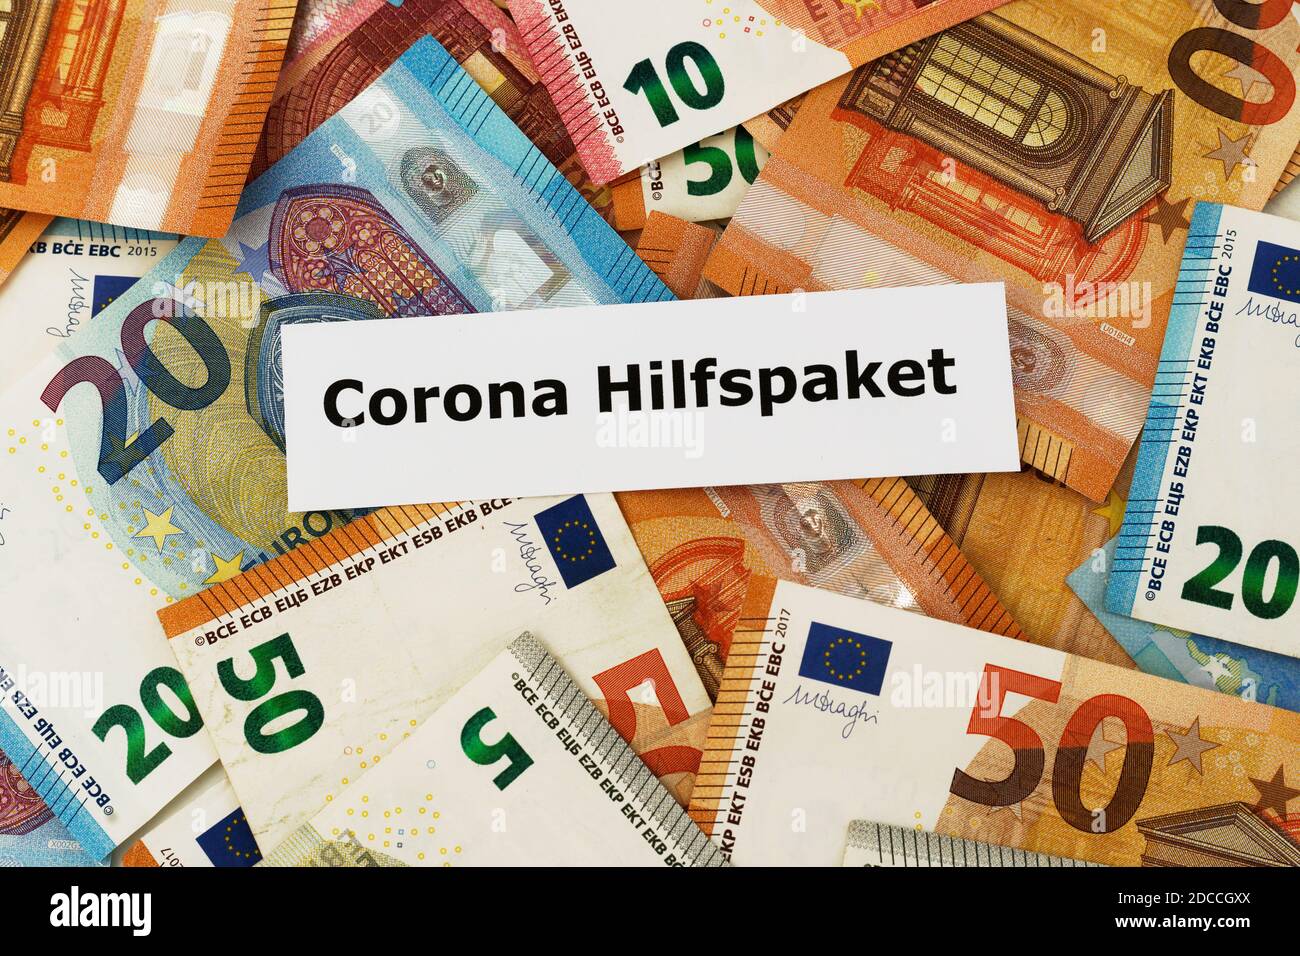 Mainz, Germany - November 20, 2020: Because of the corona pandemic, the German state has to support the economy with financial aids - a piece of paper Stock Photo